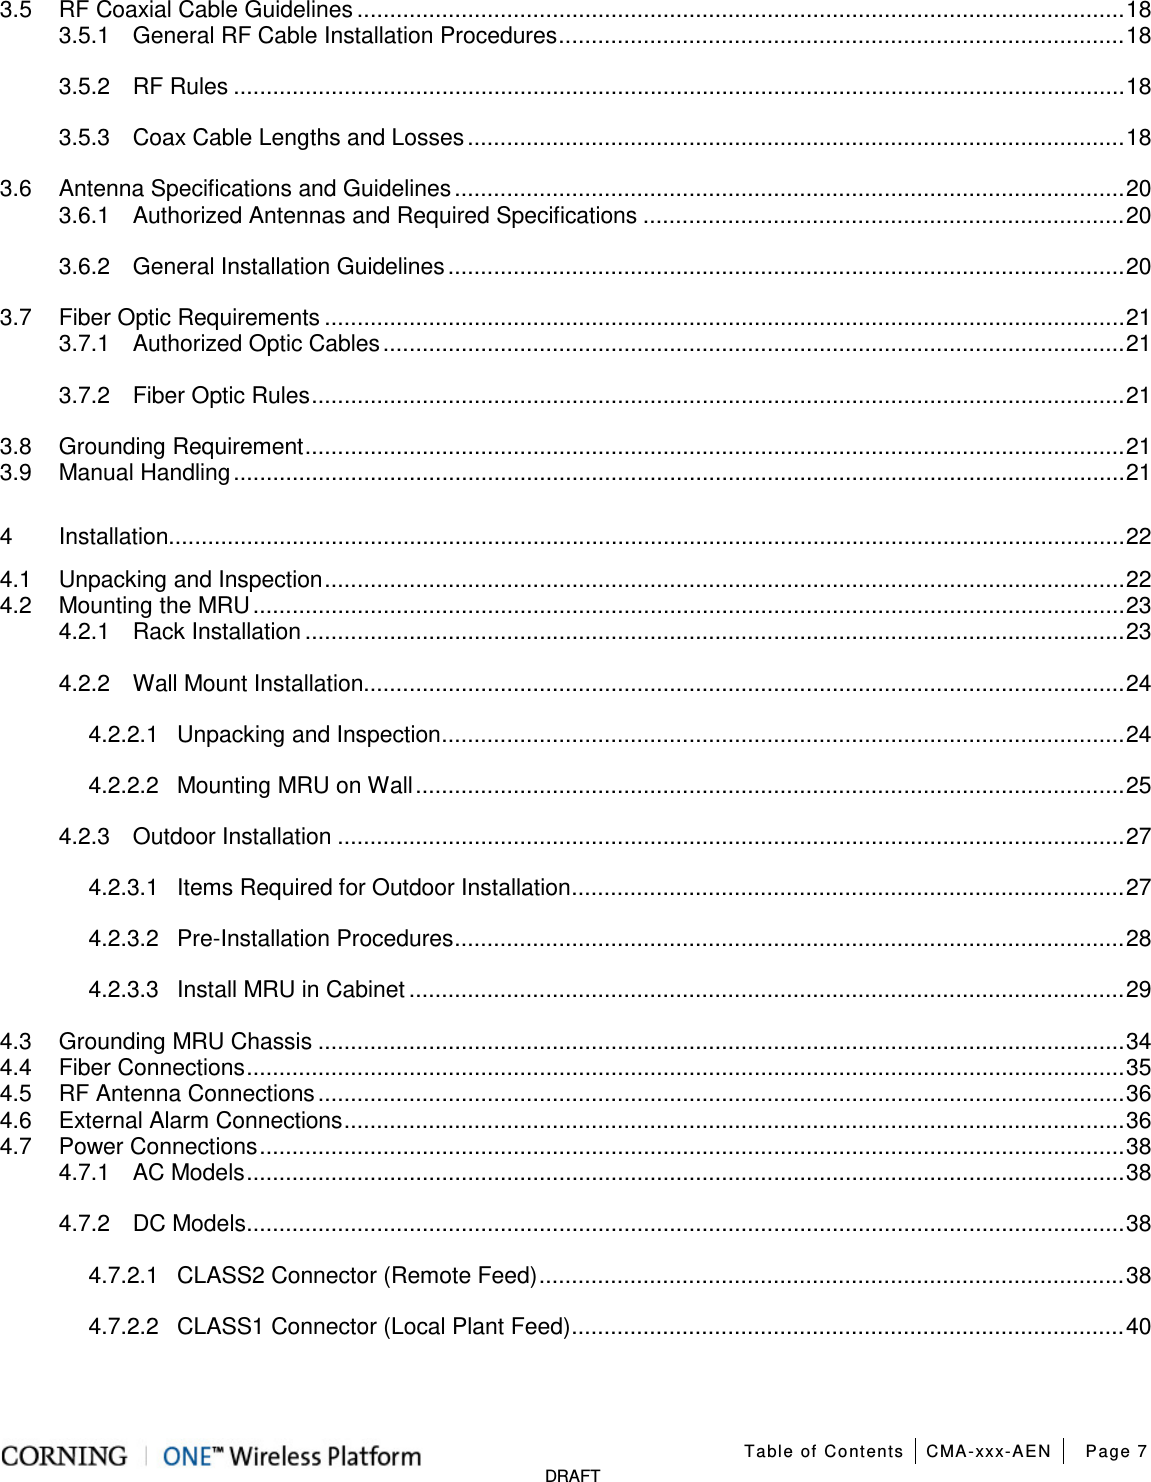  Table of Contents CMA-xxx-AEN Page 7   DRAFT 3.5 RF Coaxial Cable Guidelines ...................................................................................................................... 18 3.5.1 General RF Cable Installation Procedures ....................................................................................... 18 3.5.2 RF Rules ......................................................................................................................................... 18 3.5.3 Coax Cable Lengths and Losses ..................................................................................................... 18 3.6 Antenna Specifications and Guidelines ....................................................................................................... 20 3.6.1 Authorized Antennas and Required Specifications .......................................................................... 20 3.6.2 General Installation Guidelines ........................................................................................................ 20 3.7 Fiber Optic Requirements ........................................................................................................................... 21 3.7.1 Authorized Optic Cables .................................................................................................................. 21 3.7.2 Fiber Optic Rules ............................................................................................................................. 21 3.8 Grounding Requirement .............................................................................................................................. 21 3.9 Manual Handling ......................................................................................................................................... 21 4 Installation................................................................................................................................................... 22 4.1 Unpacking and Inspection ........................................................................................................................... 22 4.2 Mounting the MRU ...................................................................................................................................... 23 4.2.1 Rack Installation .............................................................................................................................. 23 4.2.2 Wall Mount Installation..................................................................................................................... 24 4.2.2.1 Unpacking and Inspection ......................................................................................................... 24 4.2.2.2 Mounting MRU on Wall ............................................................................................................. 25 4.2.3 Outdoor Installation ......................................................................................................................... 27 4.2.3.1 Items Required for Outdoor Installation ..................................................................................... 27 4.2.3.2 Pre-Installation Procedures ....................................................................................................... 28 4.2.3.3 Install MRU in Cabinet .............................................................................................................. 29 4.3 Grounding MRU Chassis ............................................................................................................................ 34 4.4 Fiber Connections ....................................................................................................................................... 35 4.5 RF Antenna Connections ............................................................................................................................ 36 4.6 External Alarm Connections ........................................................................................................................ 36 4.7 Power Connections ..................................................................................................................................... 38 4.7.1 AC Models ....................................................................................................................................... 38 4.7.2 DC Models ....................................................................................................................................... 38 4.7.2.1 CLASS2 Connector (Remote Feed) .......................................................................................... 38 4.7.2.2 CLASS1 Connector (Local Plant Feed) ..................................................................................... 40 